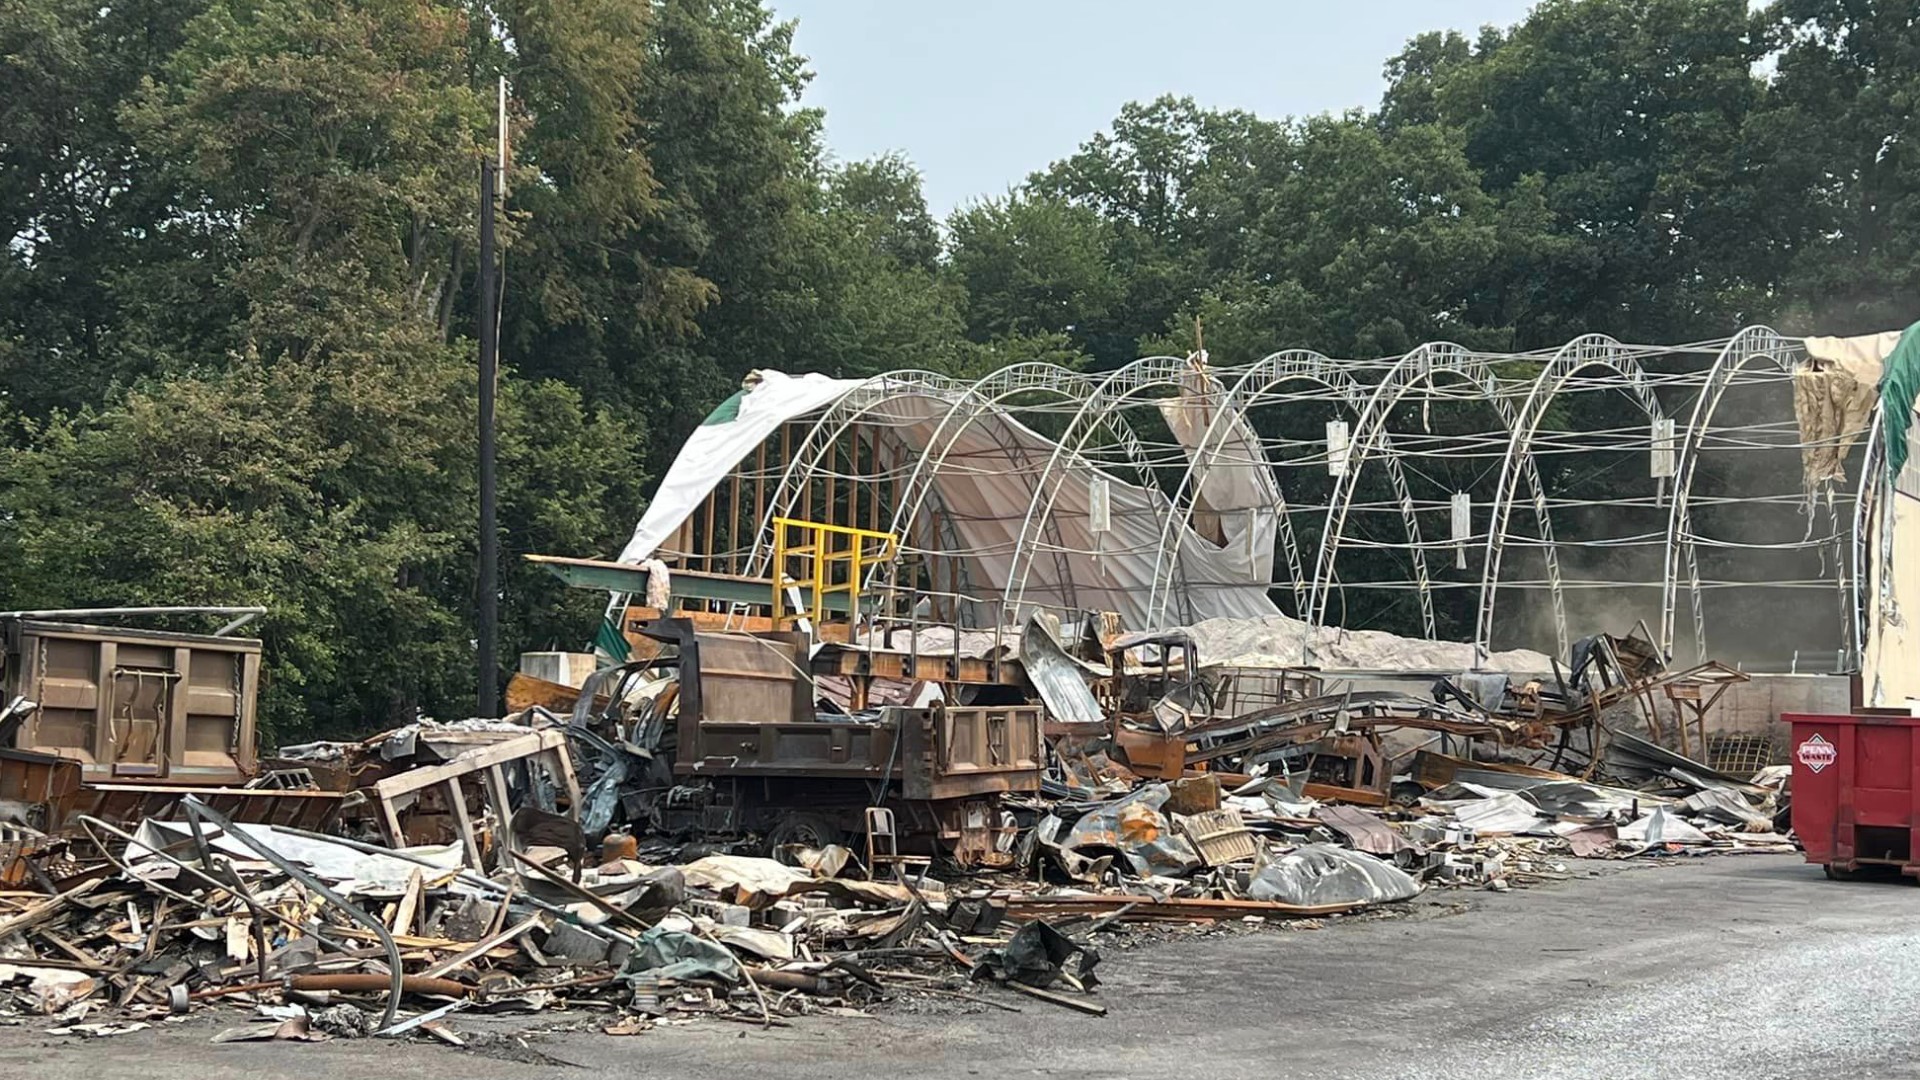 The July 5 explosion leveled the township's public works building and severely damaged its administrative offices, along with neighboring homes.